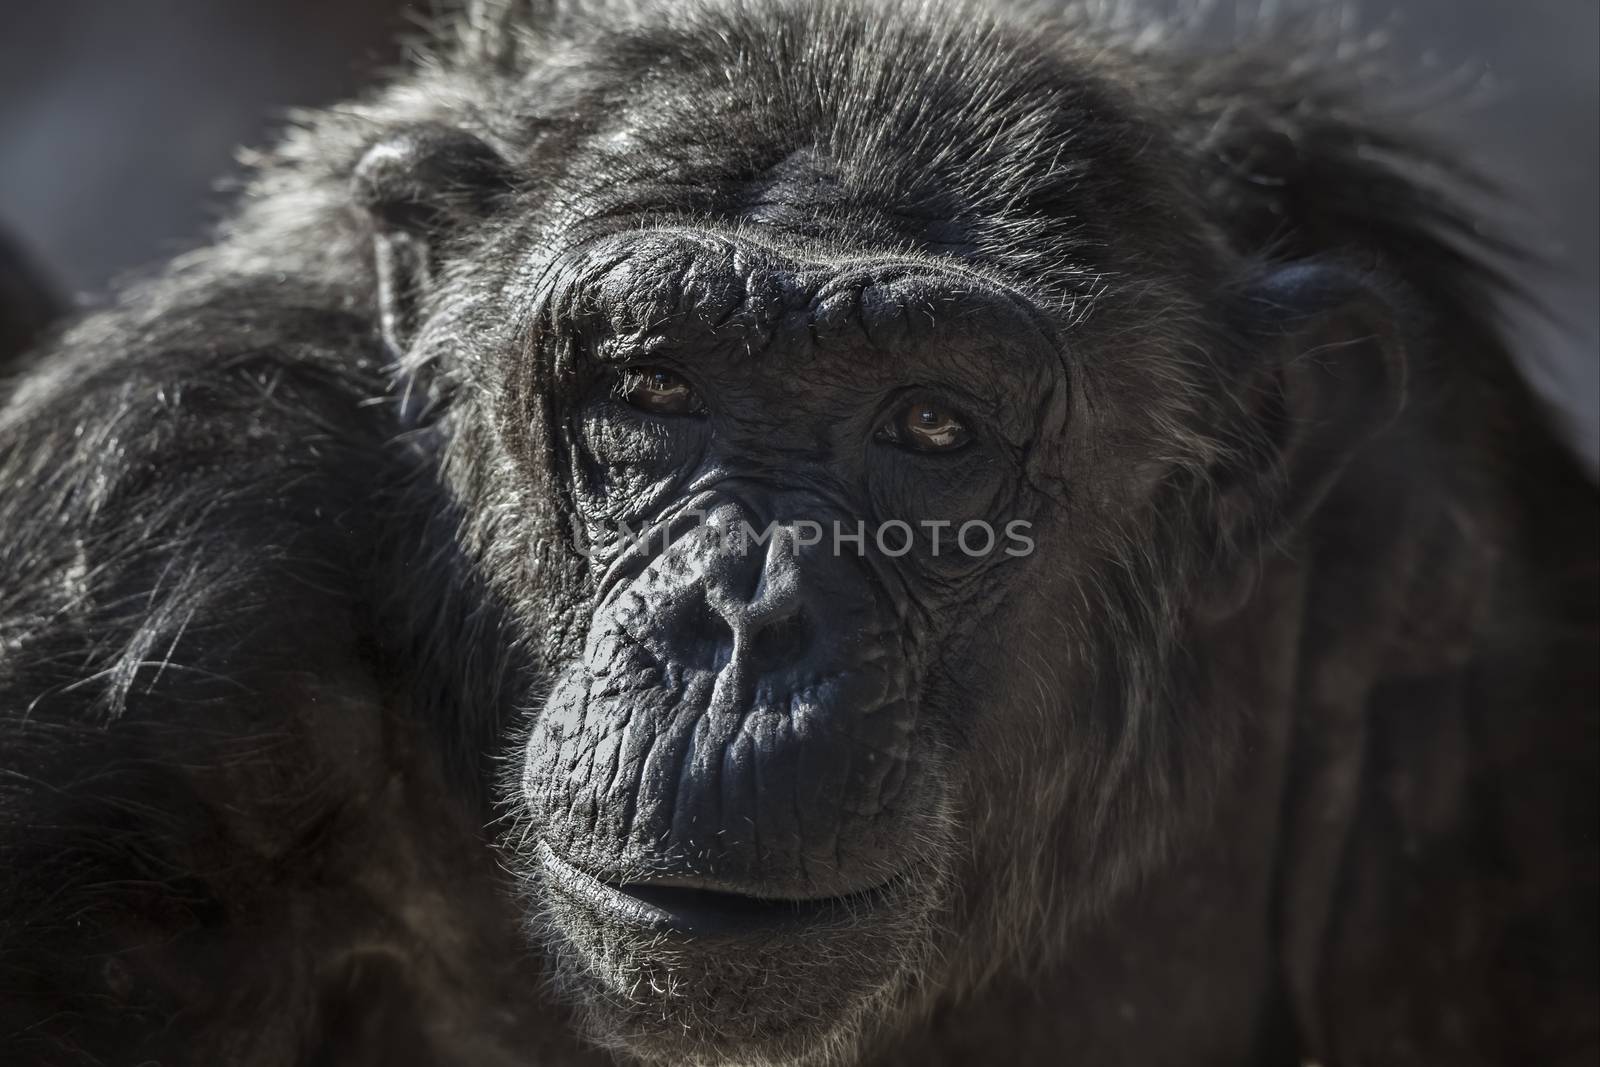 Old chimpanzee portrait at the zoo Barcelona, in Spain by Digoarpi